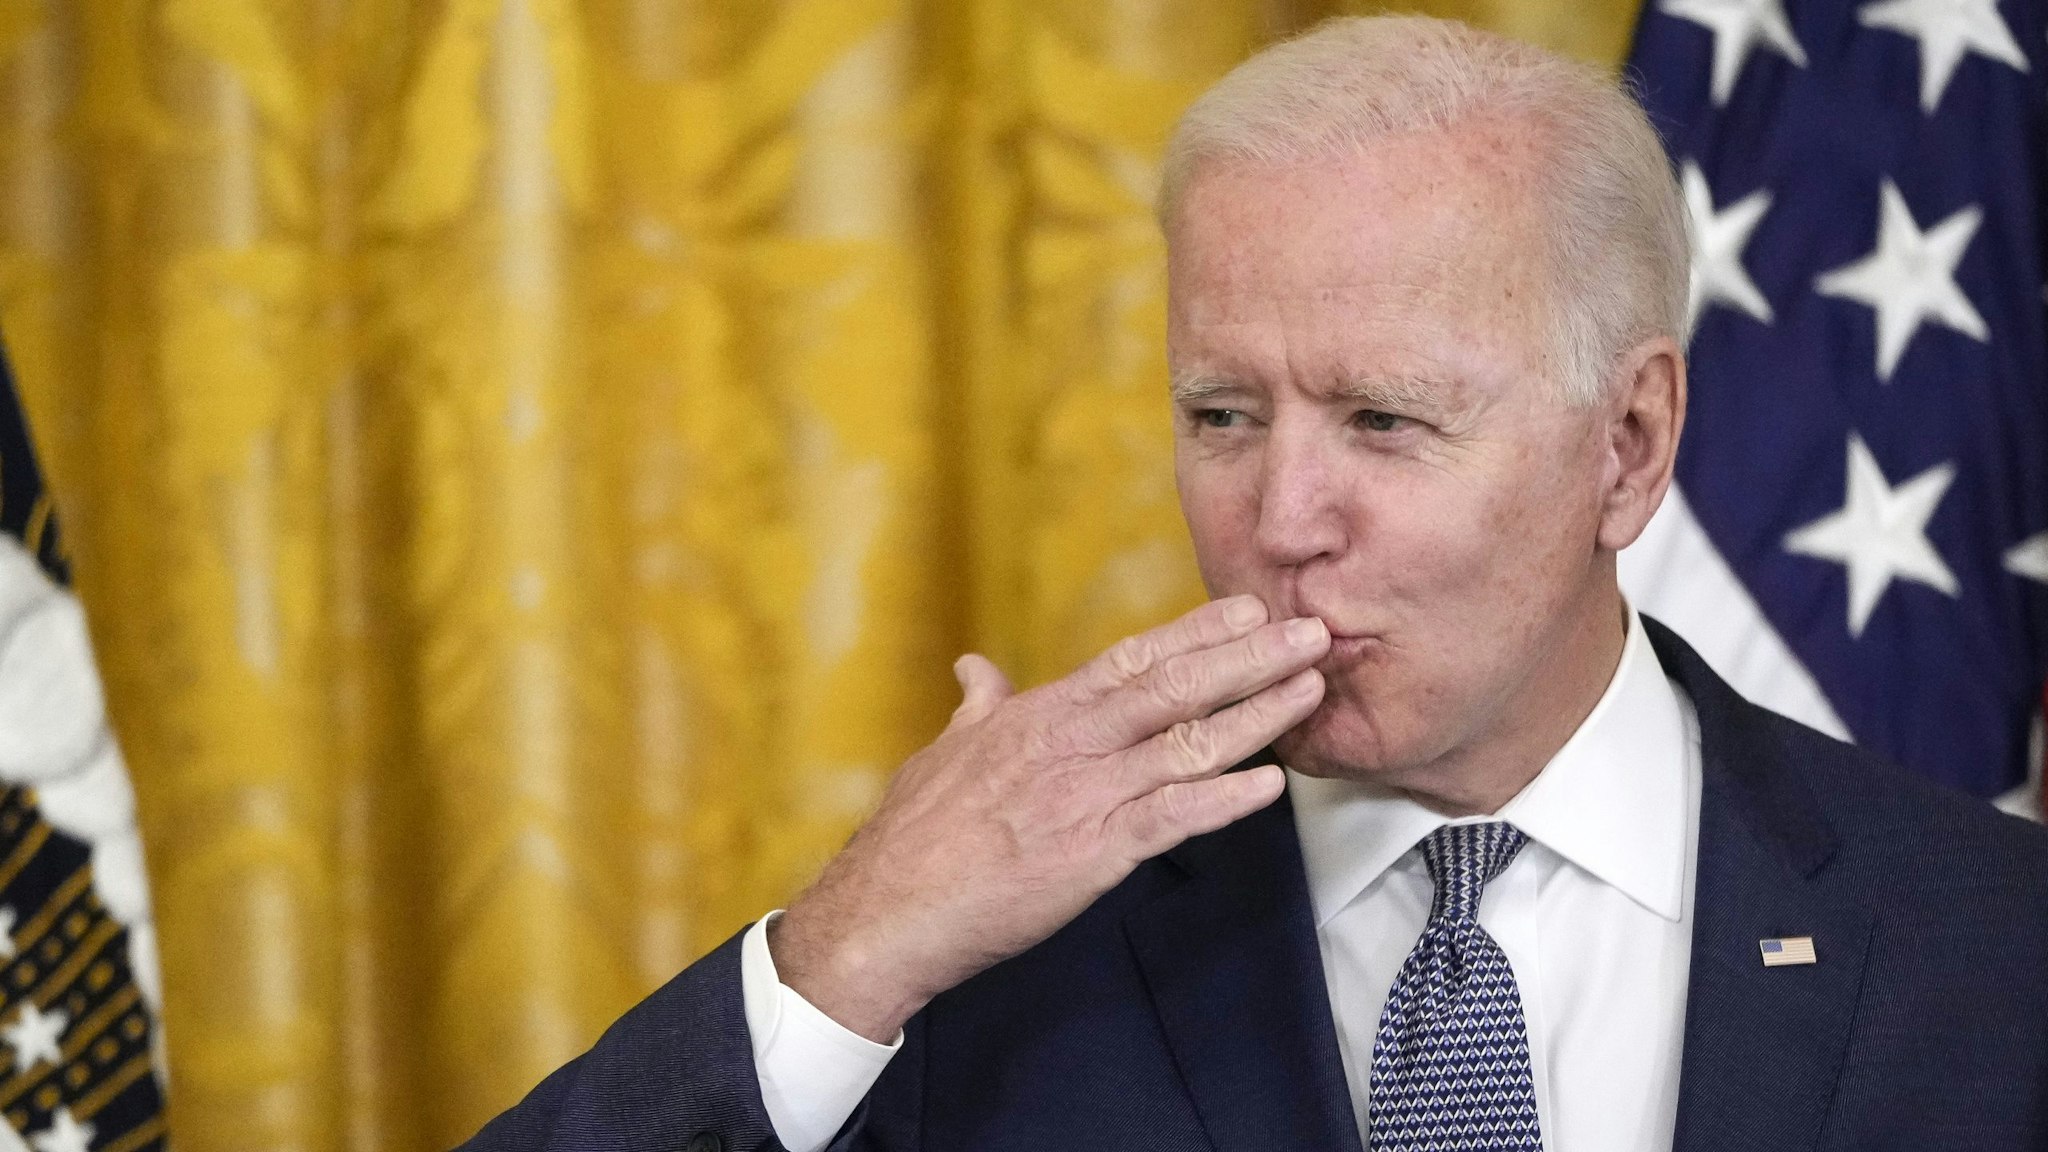 WASHINGTON, DC - JUNE 17: U.S. President Joe Biden blows a kiss to the audience before signing the Juneteenth National Independence Day Act into law in the East Room of the White House on June 17, 2021 in Washington, DC. The Juneteenth holiday marks the end of slavery in the United States and the Juneteenth National Independence Day will become the 12th legal federal holiday — the first new one since Martin Luther King Jr. Day was signed into law in 1983.